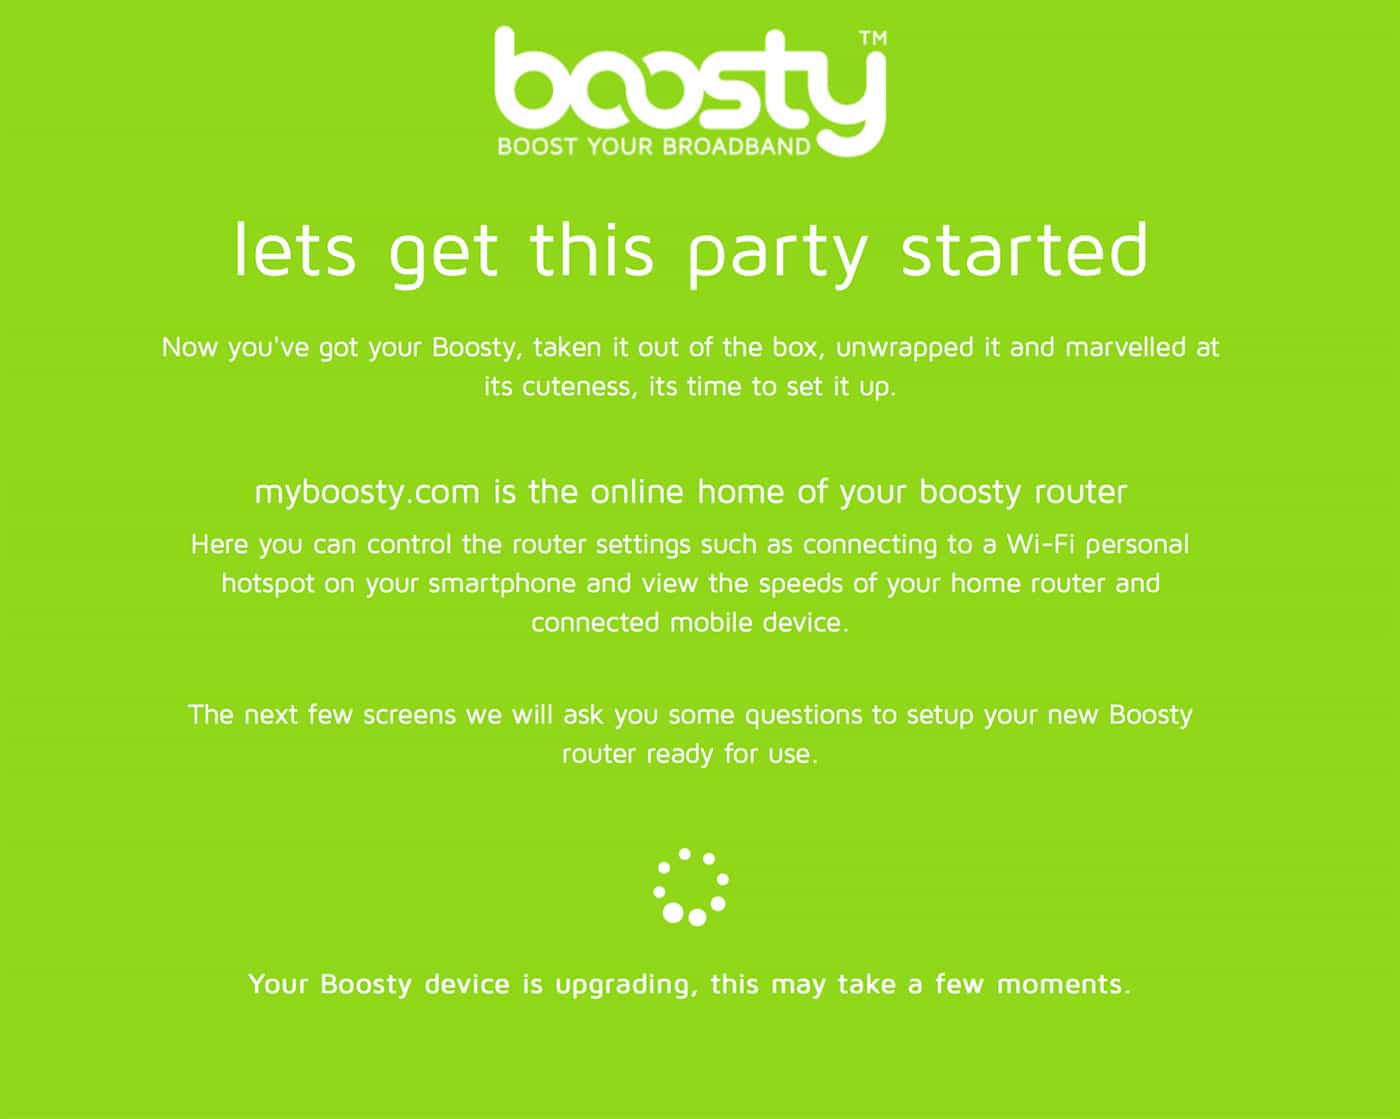 Start up for Boosty